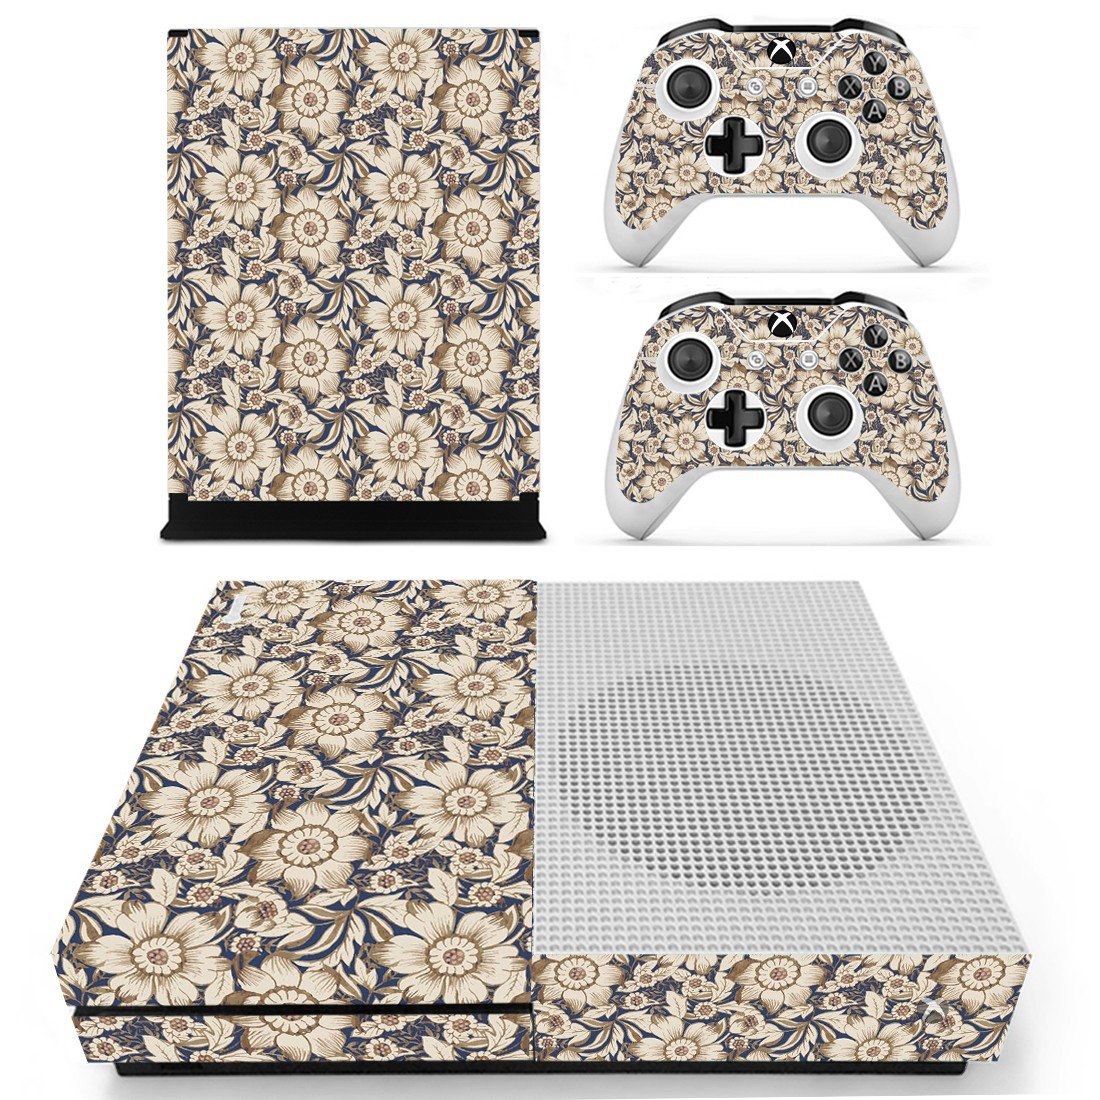 Xbox One S Skin Cover - Floral Pattern